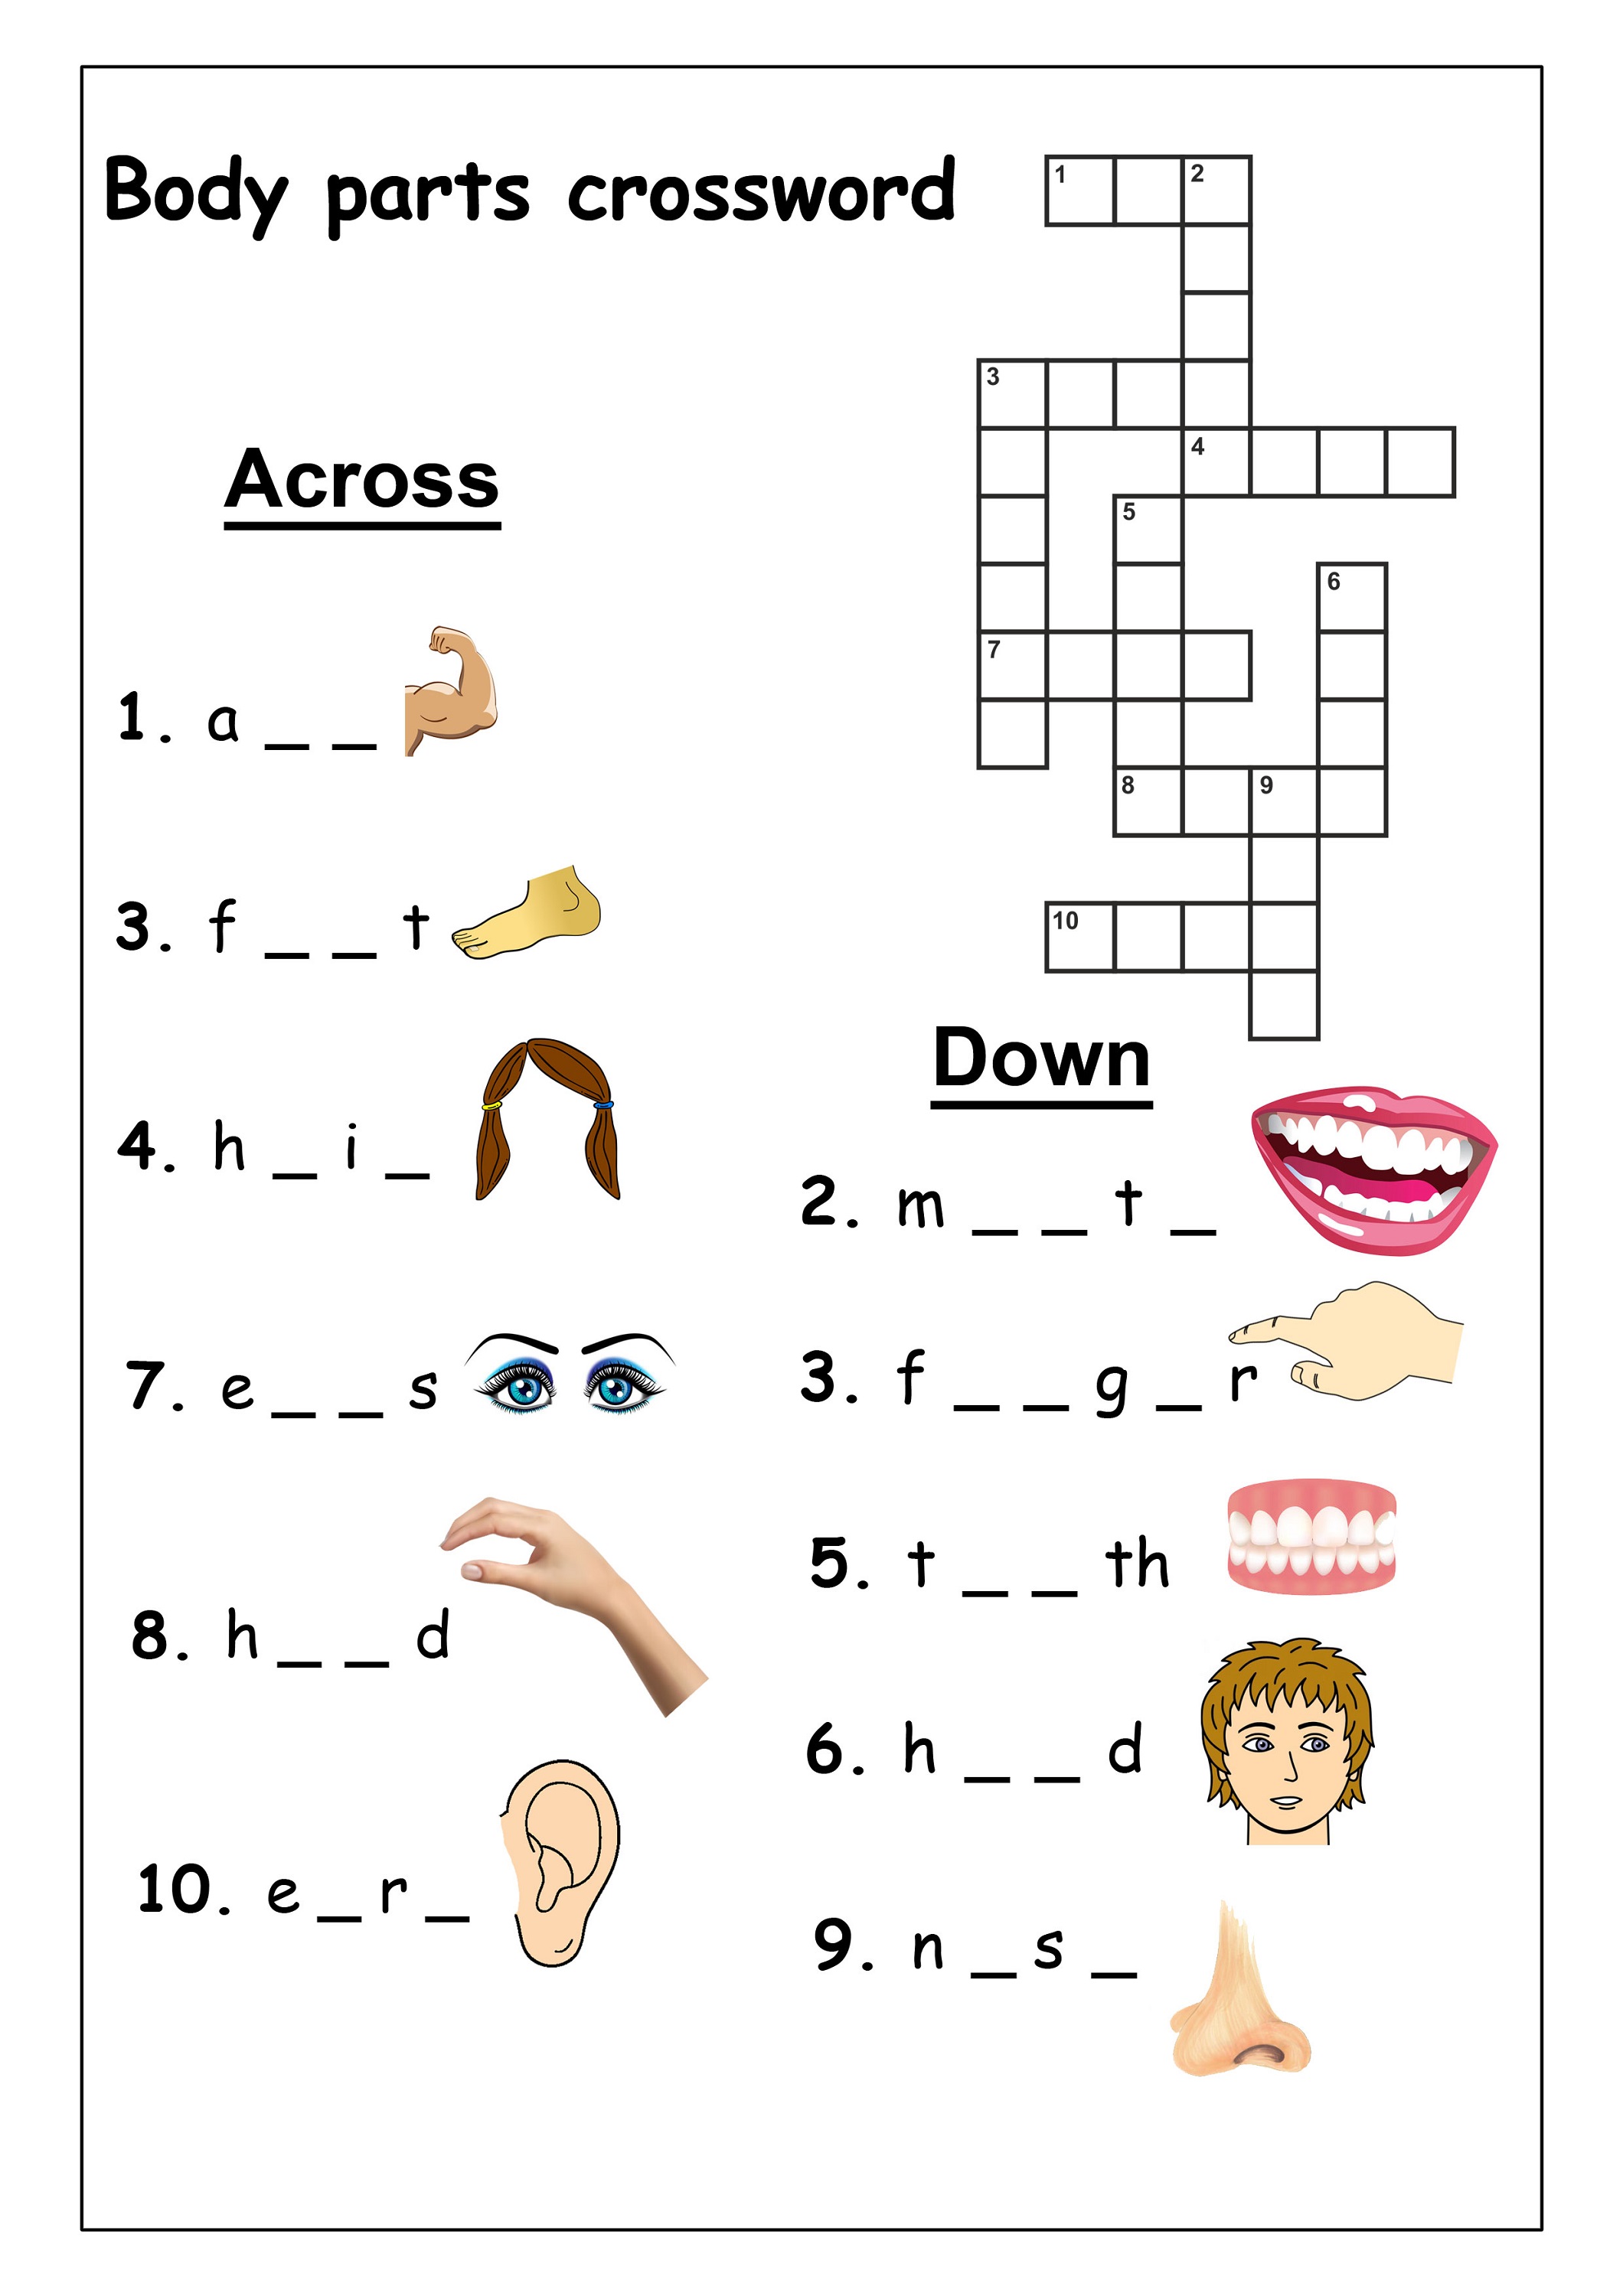 online crossword puzzles free Words flip games game word play pc